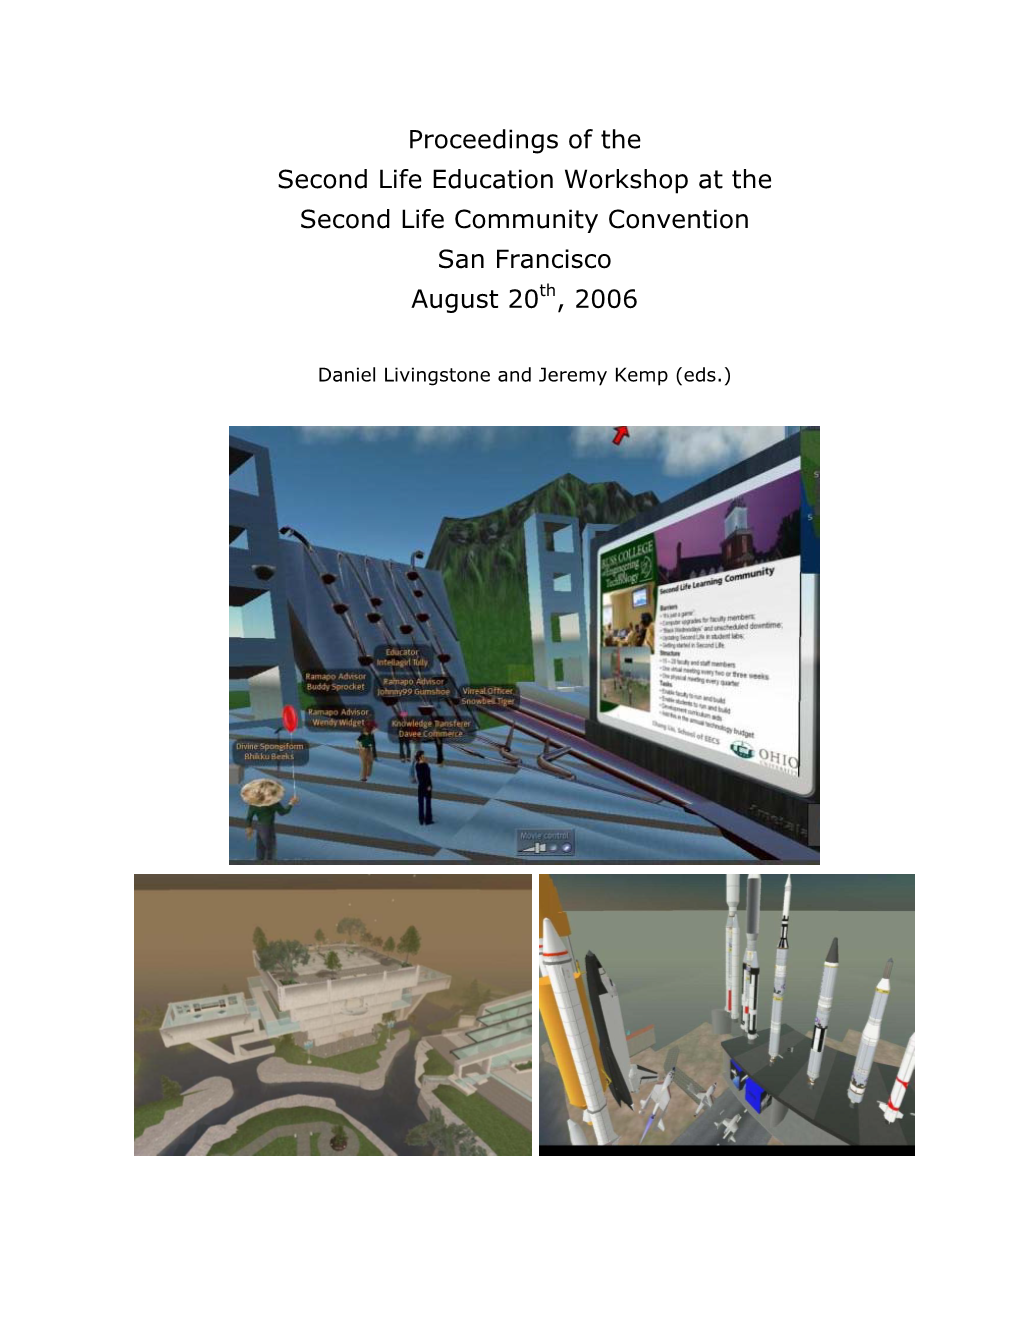 Putting a Second Life “Metaverse” Skin on Learning Management Systems